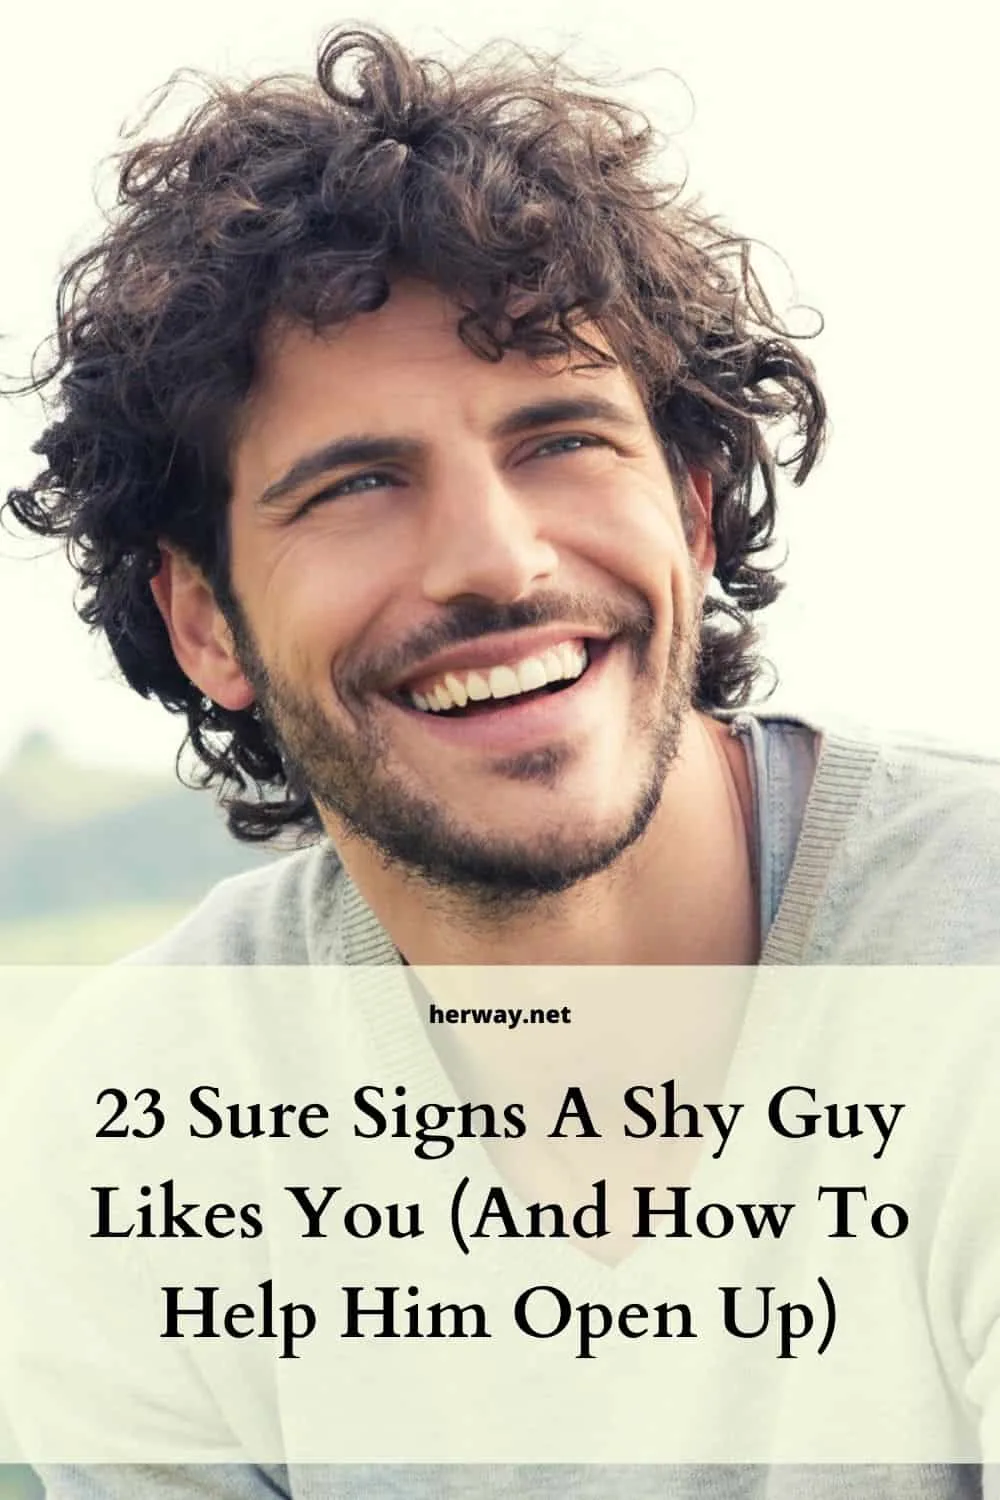 23 Sure Signs A Shy Guy Likes You (And How To Help Him Open Up)